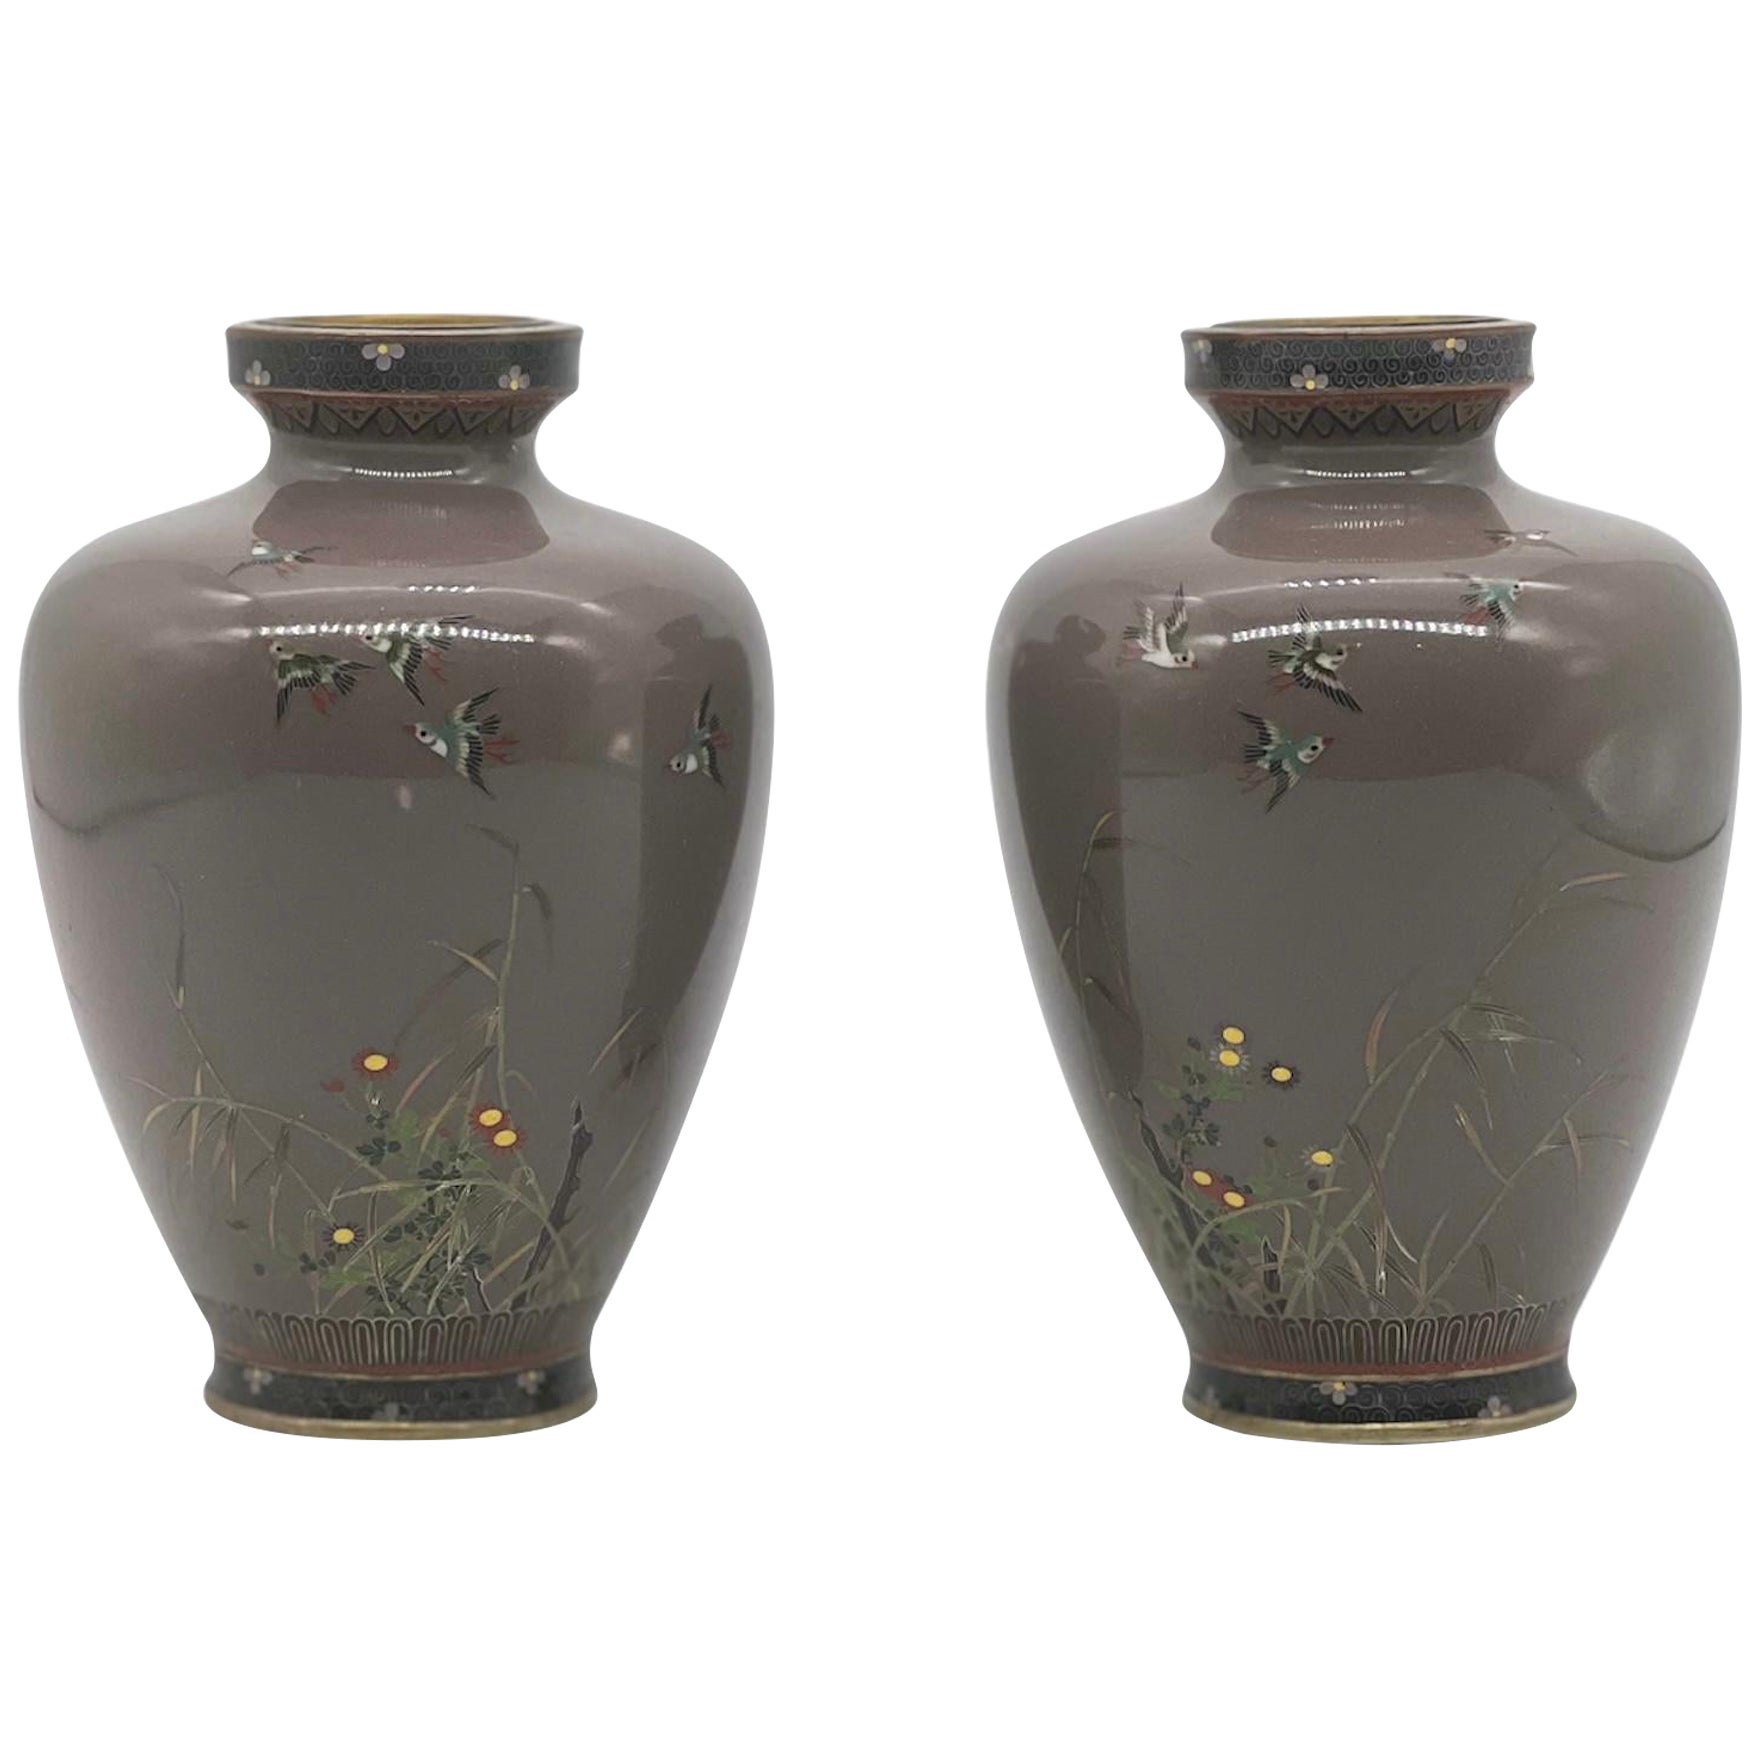 A Fine Pair of Japanese Cloisonne Enamel Vases Attributed to Hayashi Kodenji For Sale